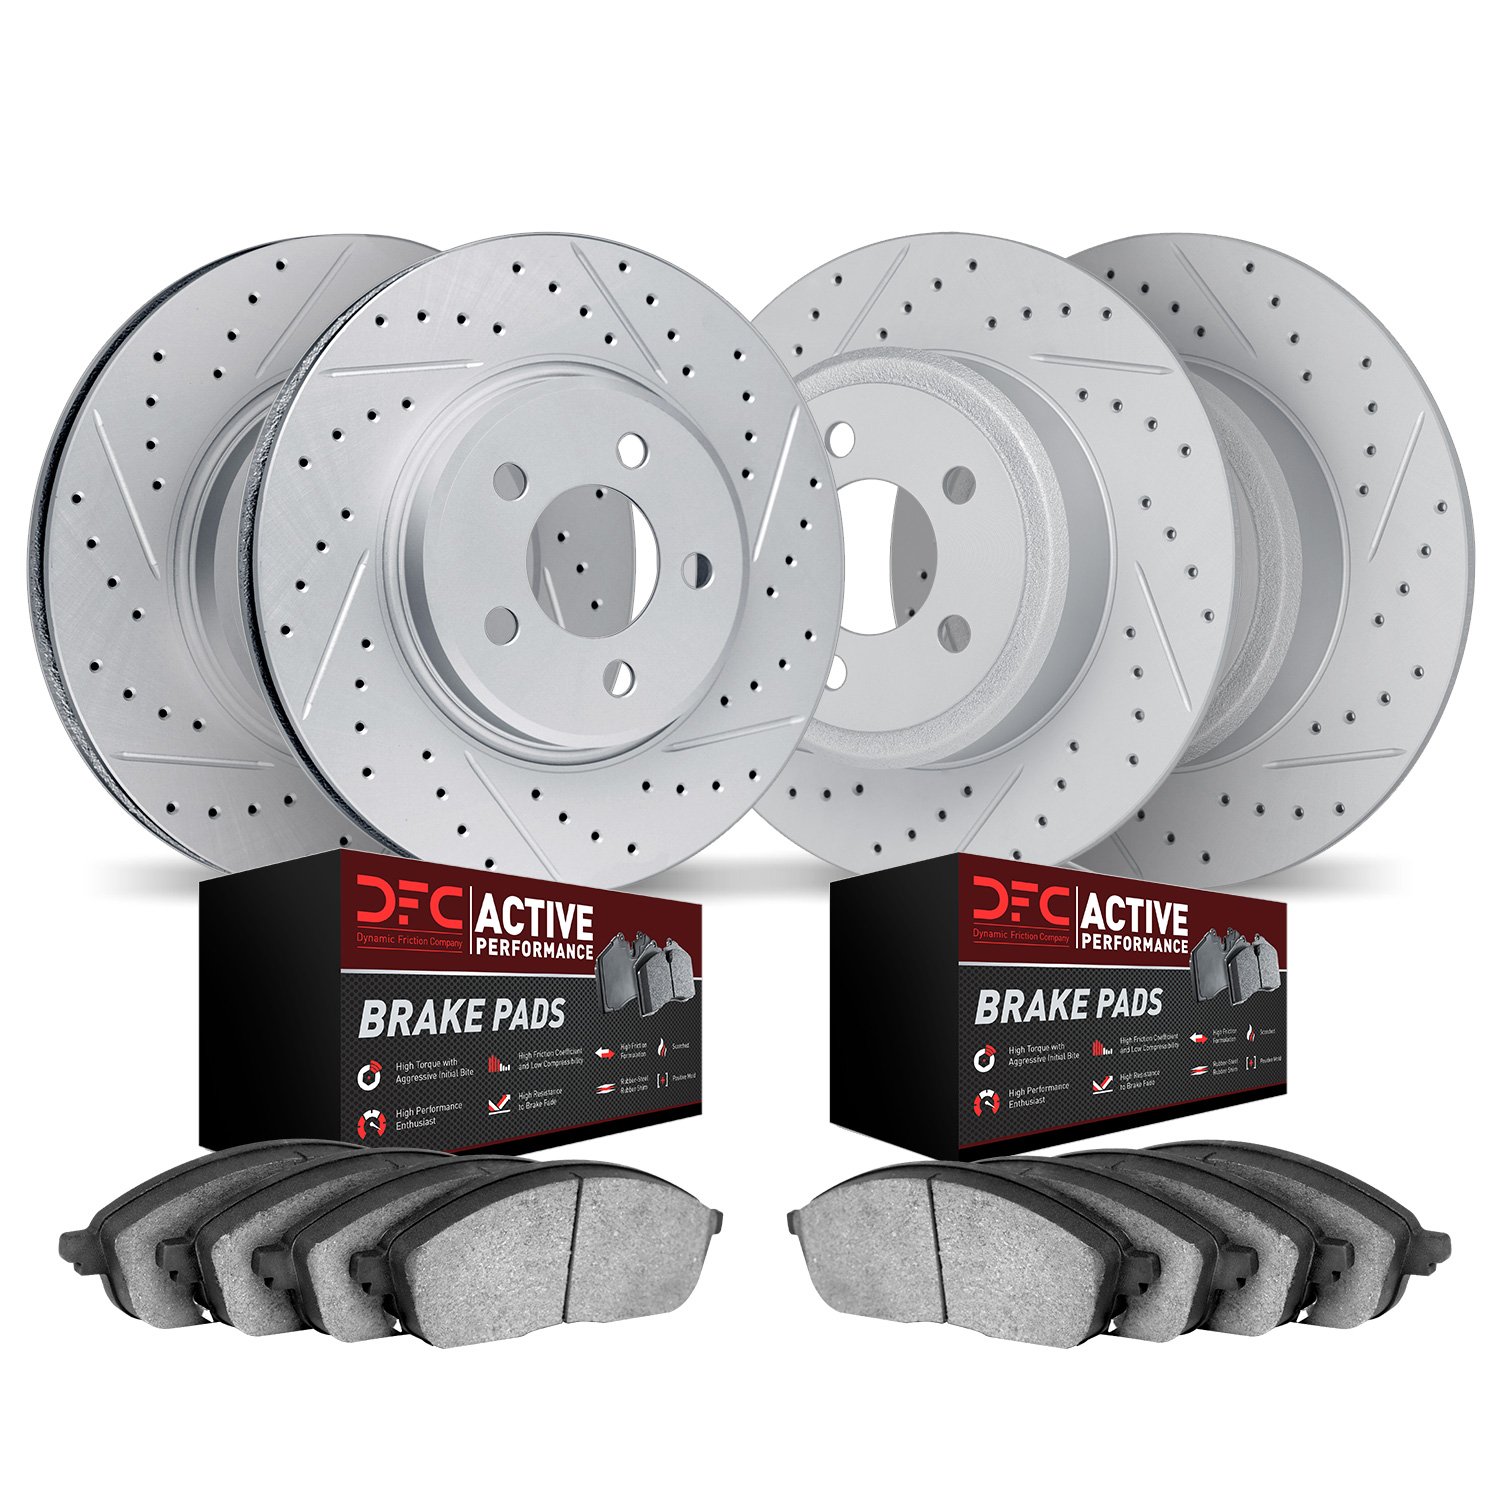 2704-72000 Geoperformance Drilled/Slotted Brake Rotors with Active Performance Pads Kit, 1994-2000 Multiple Makes/Models, Positi